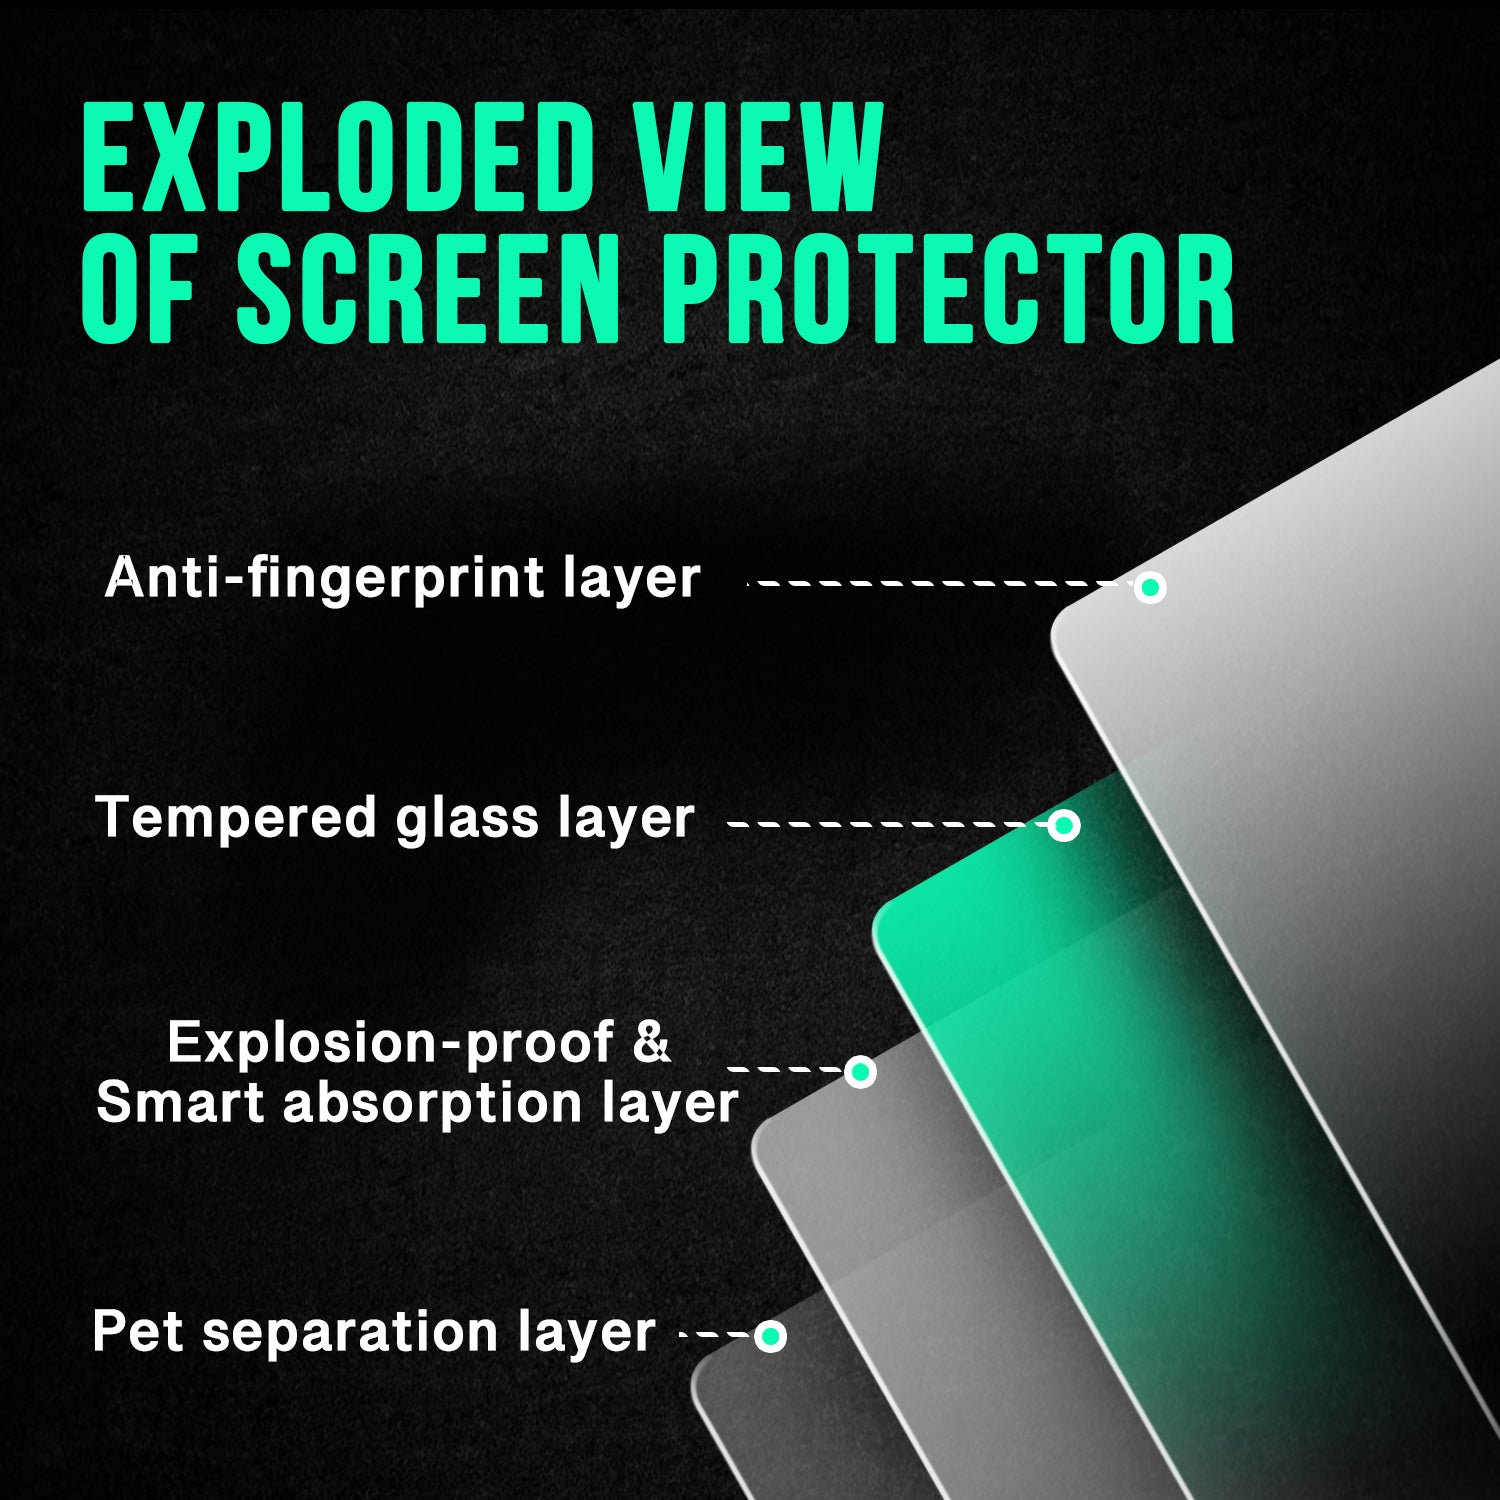 Screen Protector for Model 3&Y 15" Dashboard, 1 Minute Installation with Auto-alignment Tool